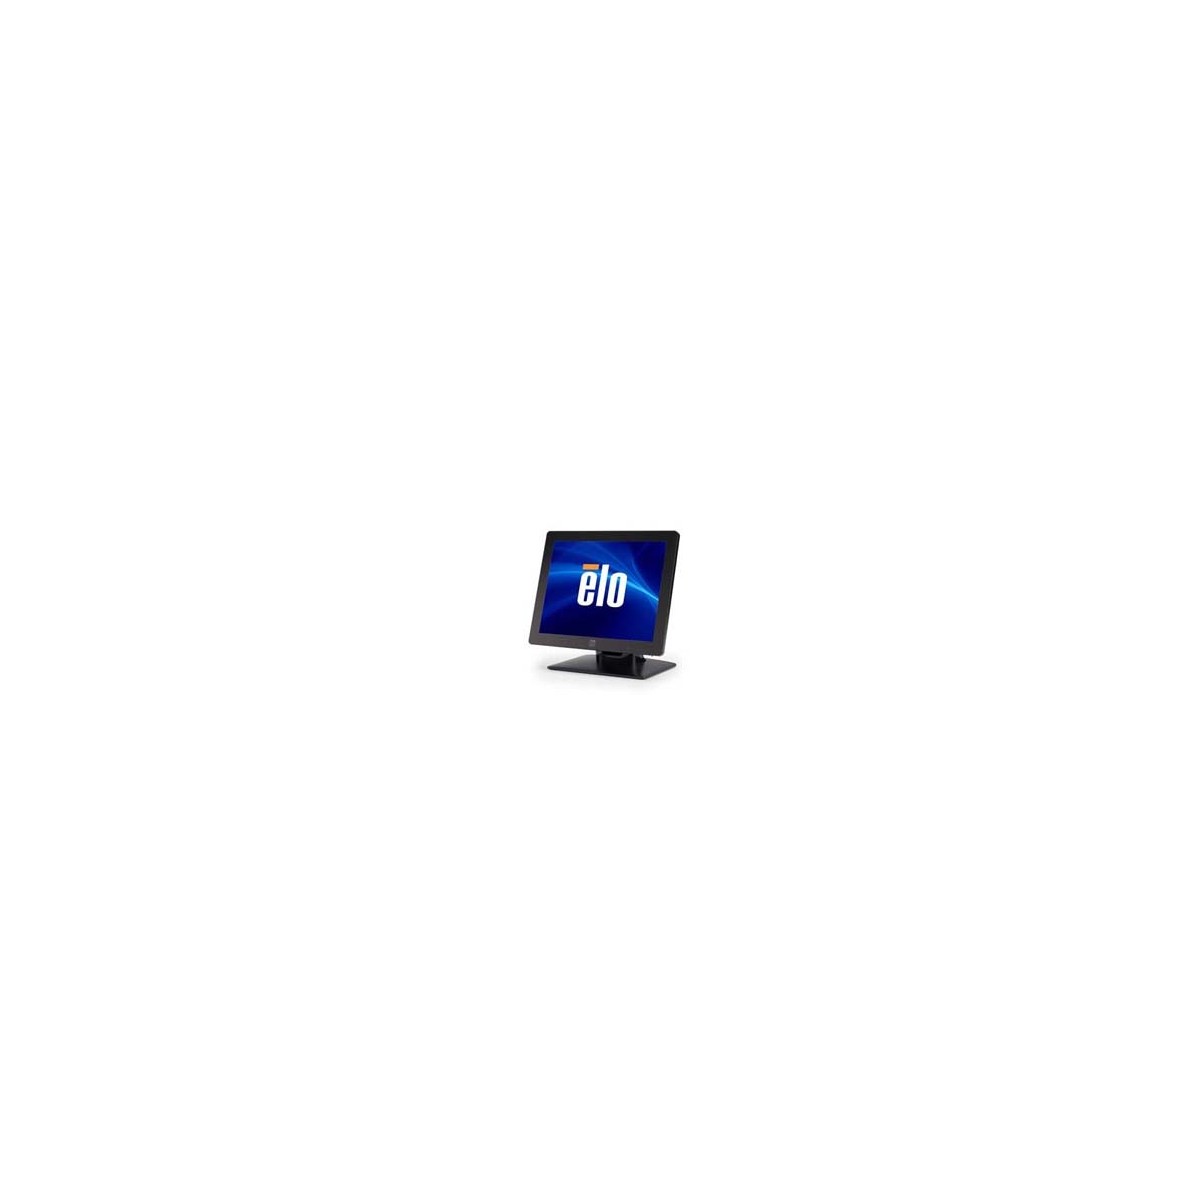 Elo Touch Solutions Elo Touch Solution 1517L Rev B - 38.1 cm (15) - 200 cd/m² - LCD/TFT - 4:3 - 1024 x 768 pixels - LCD